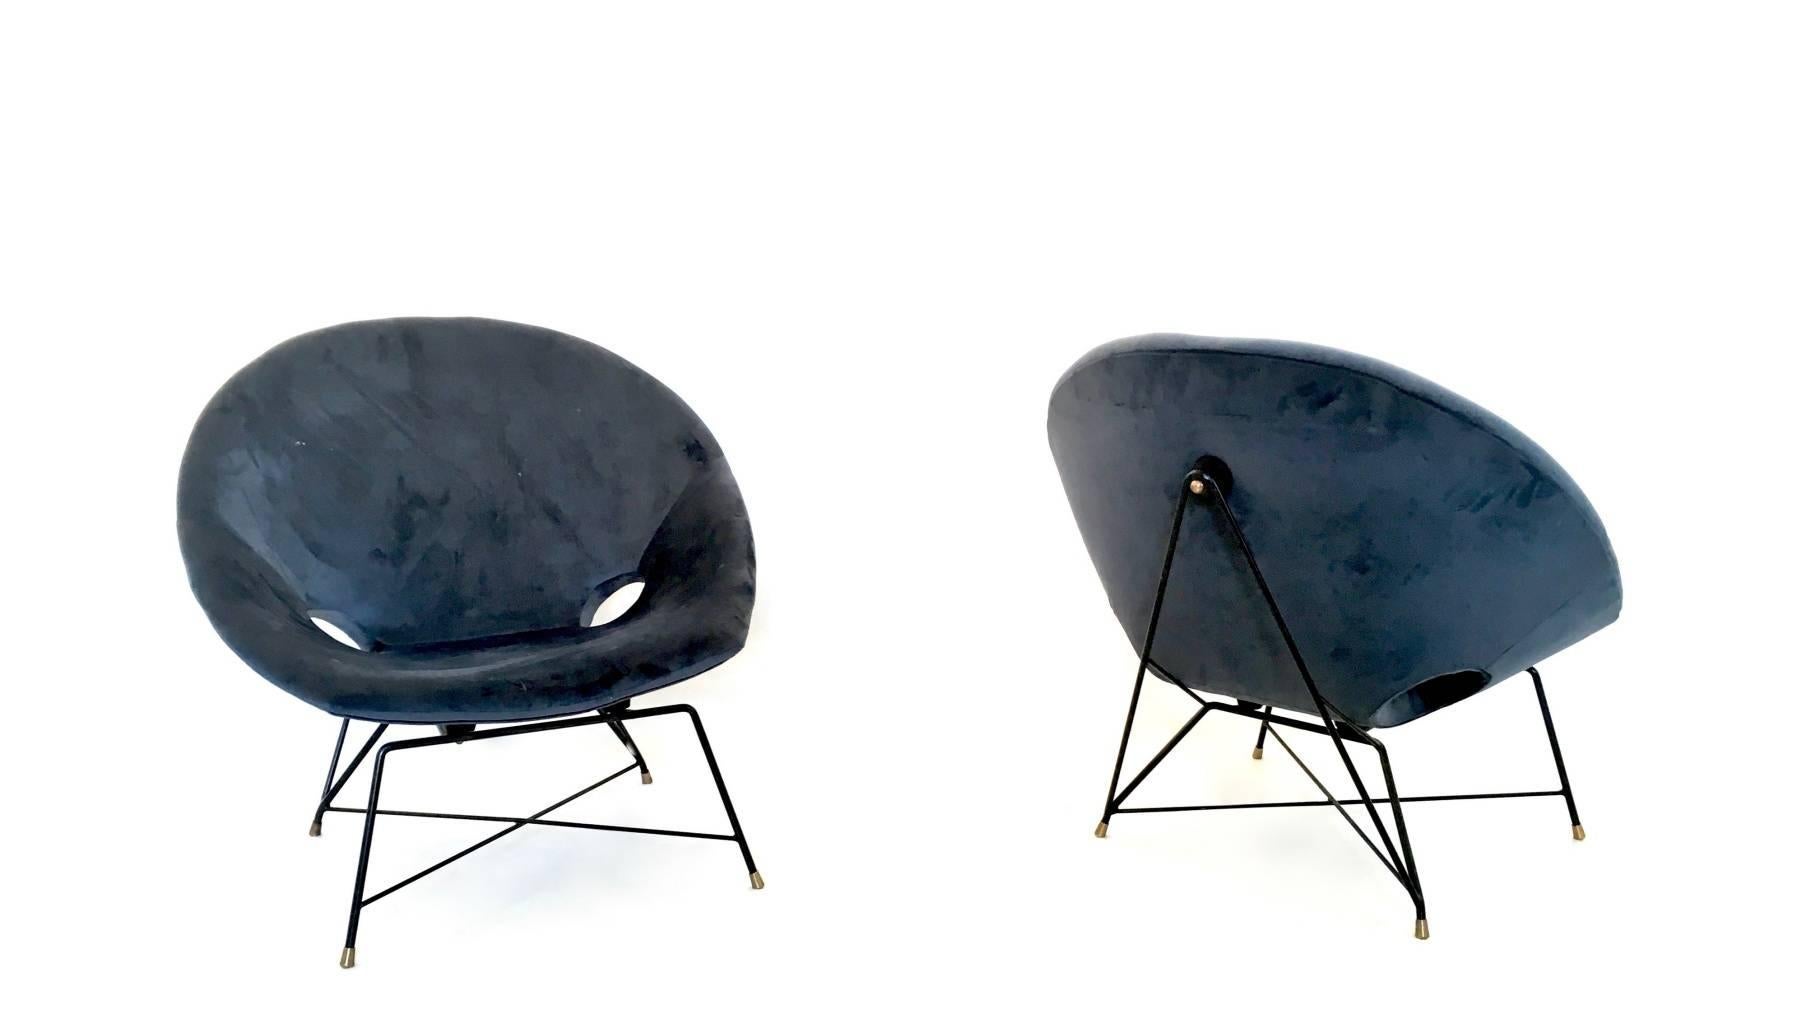 They are made in varnished iron, curved wood and these lounge chairs feature brass feet caps and padding upholstered in velvet.
They may show slight traces of use, but are in good original condition.
Measures: 
Width 80cm
Height 80cm
Depth 82cm
Seat